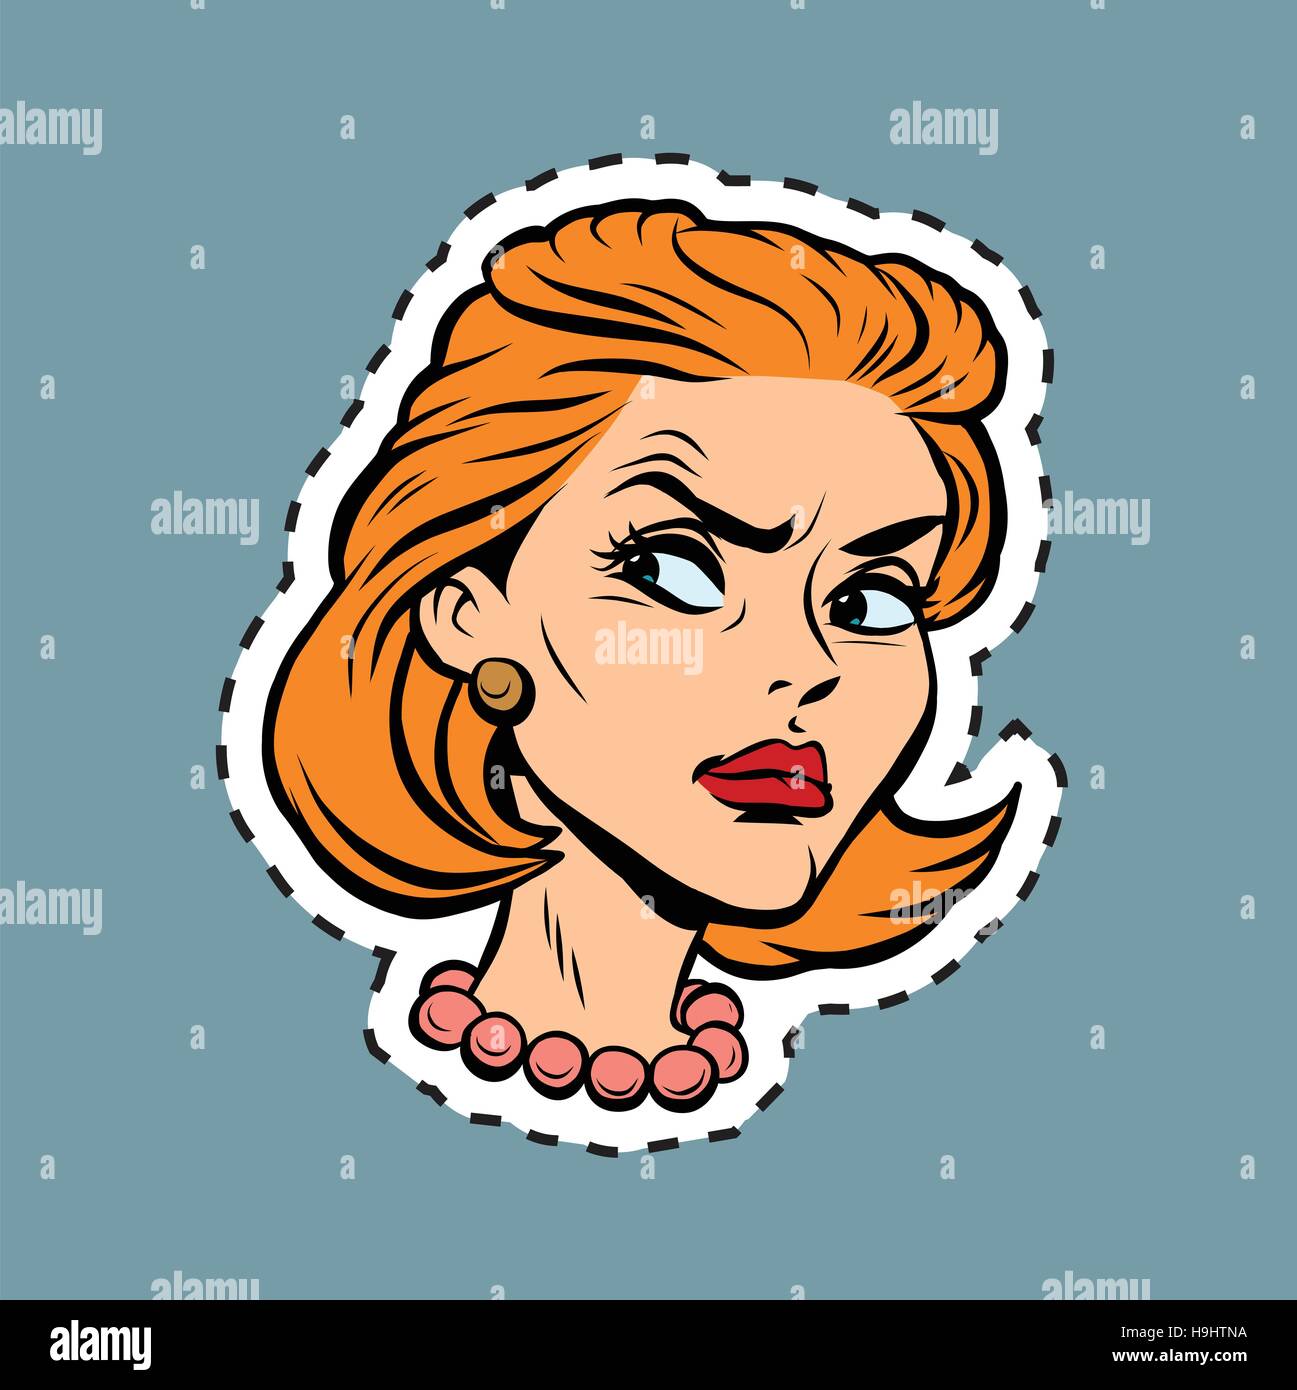 Angry Face - Angry Face Emoji - Sticker